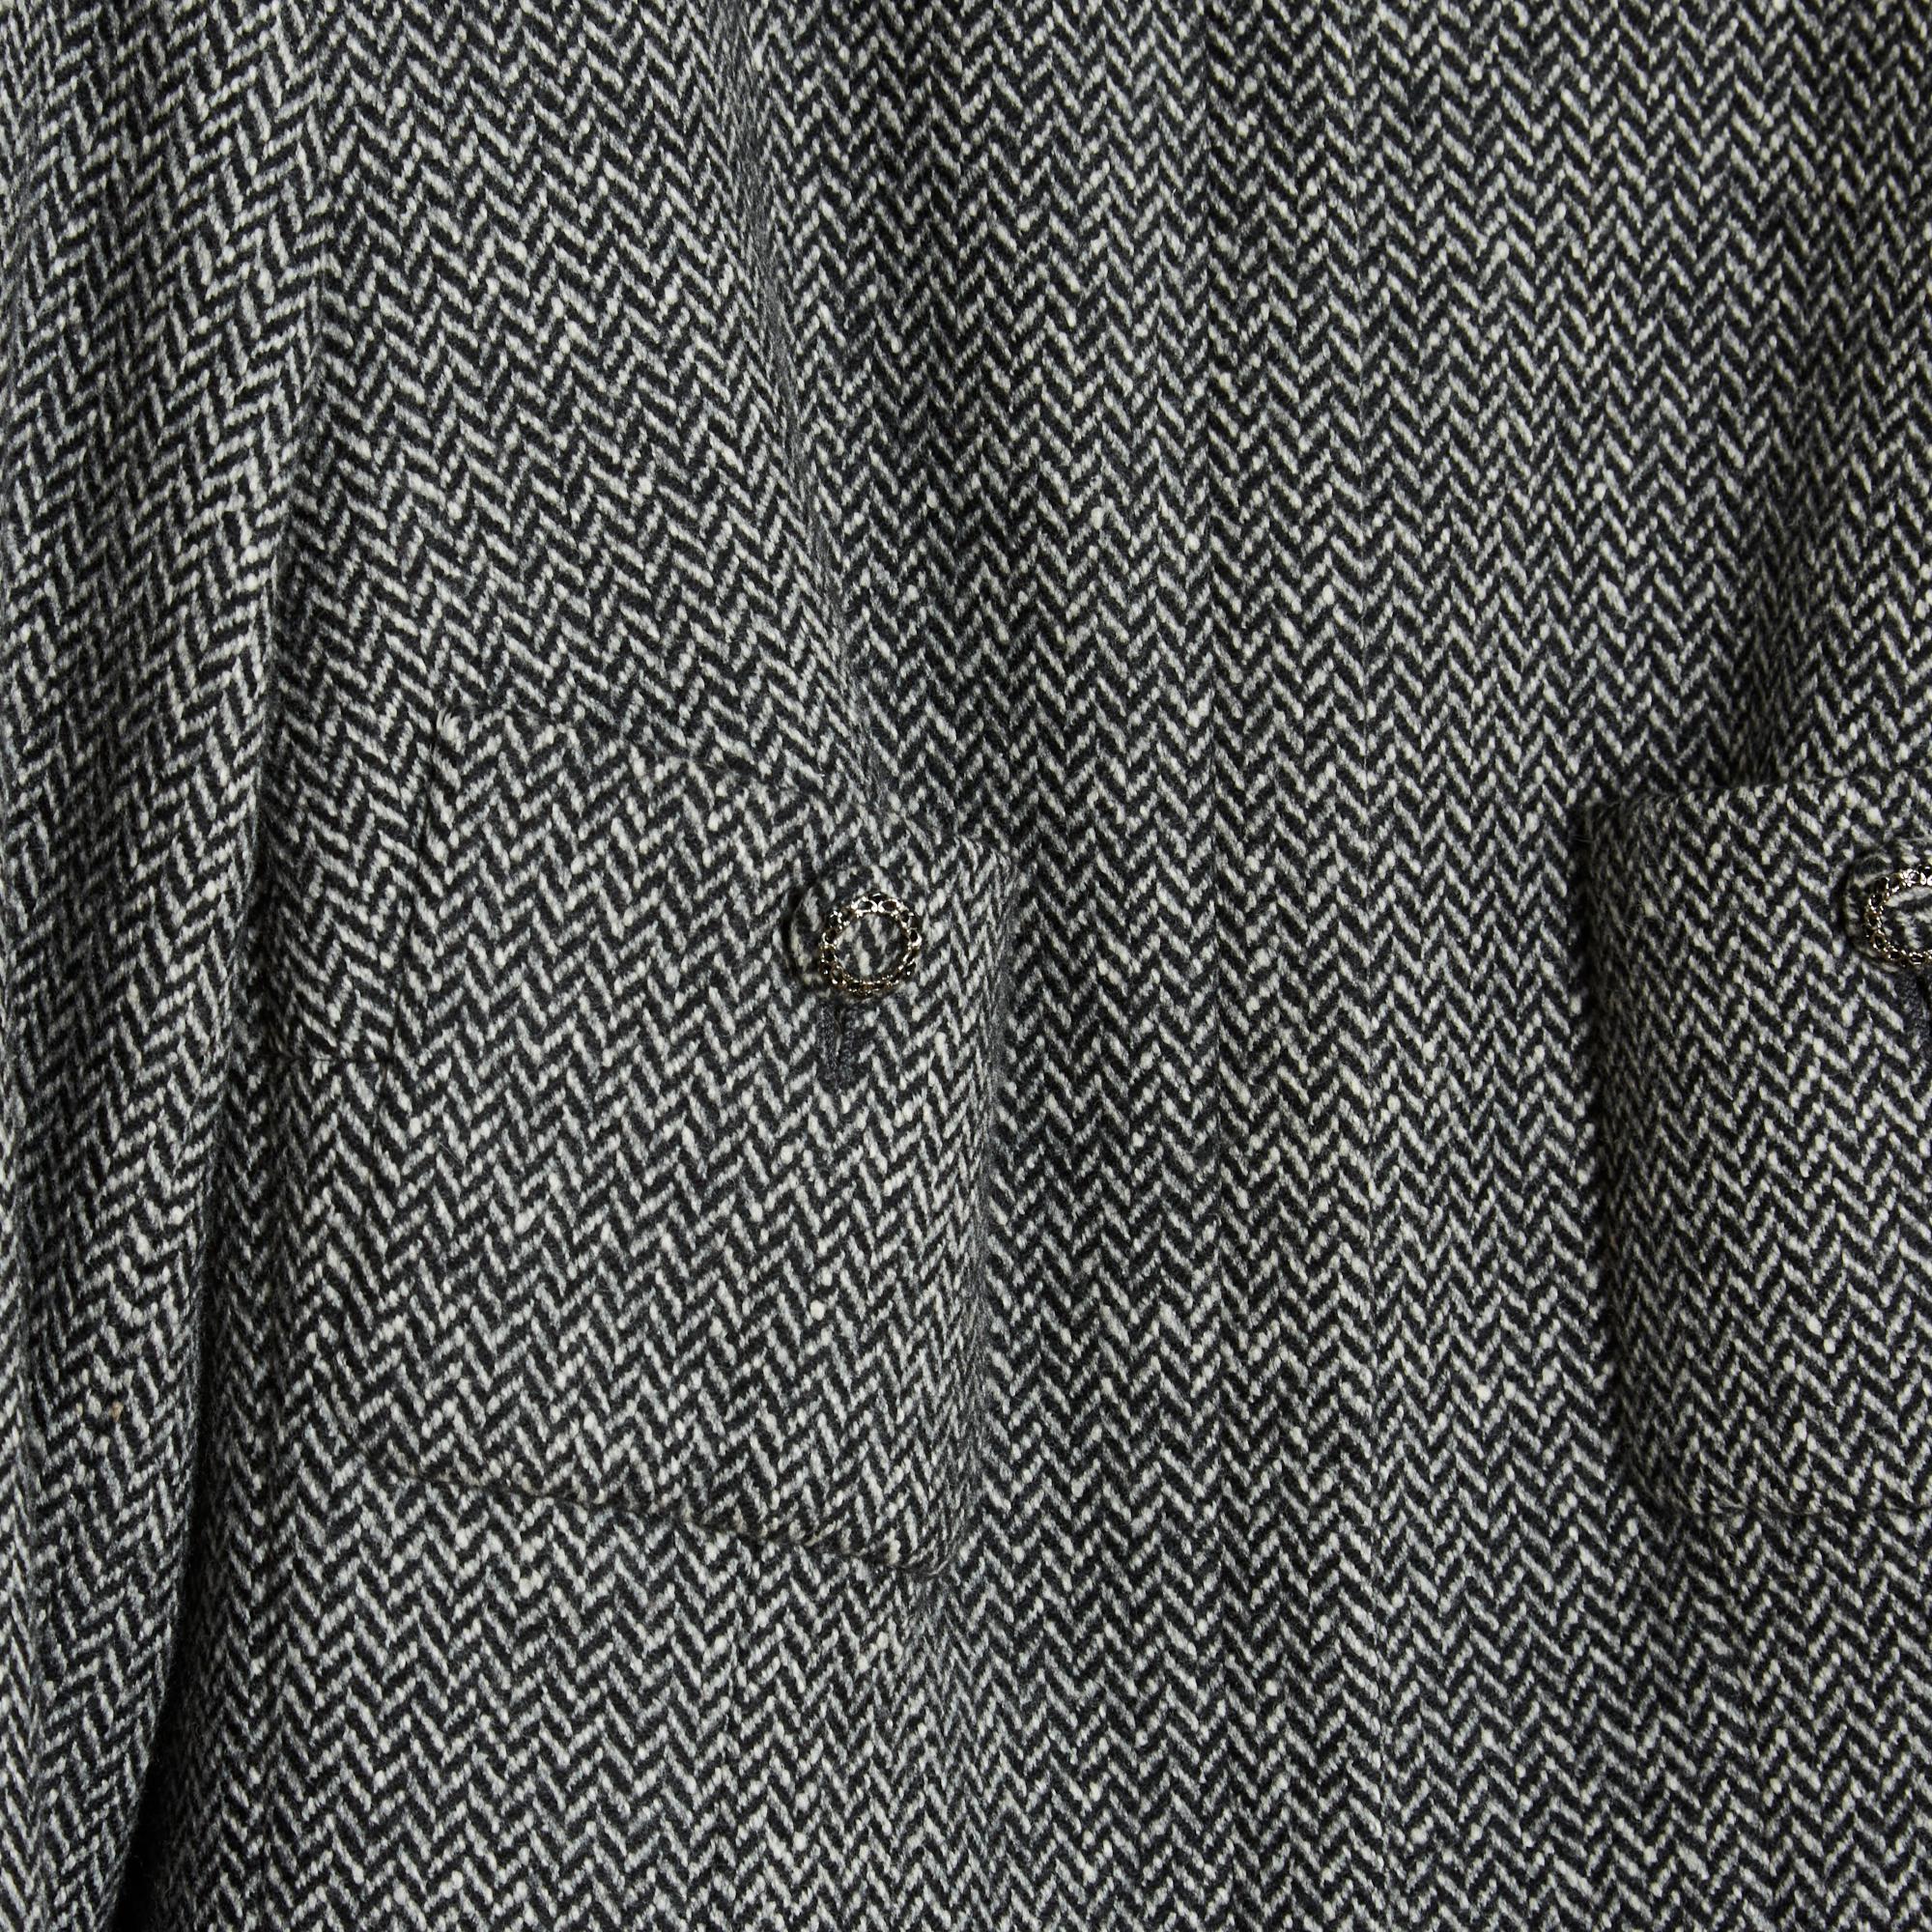 Chanel short jacket from the Fall Winter 2008 collection in wool, cashmere (10%) and angora (10%) gray herringbone, round collar closed in front with a long zip, 2 chest pockets closed with 2 matching buttons, long sleeves with wide cuffs